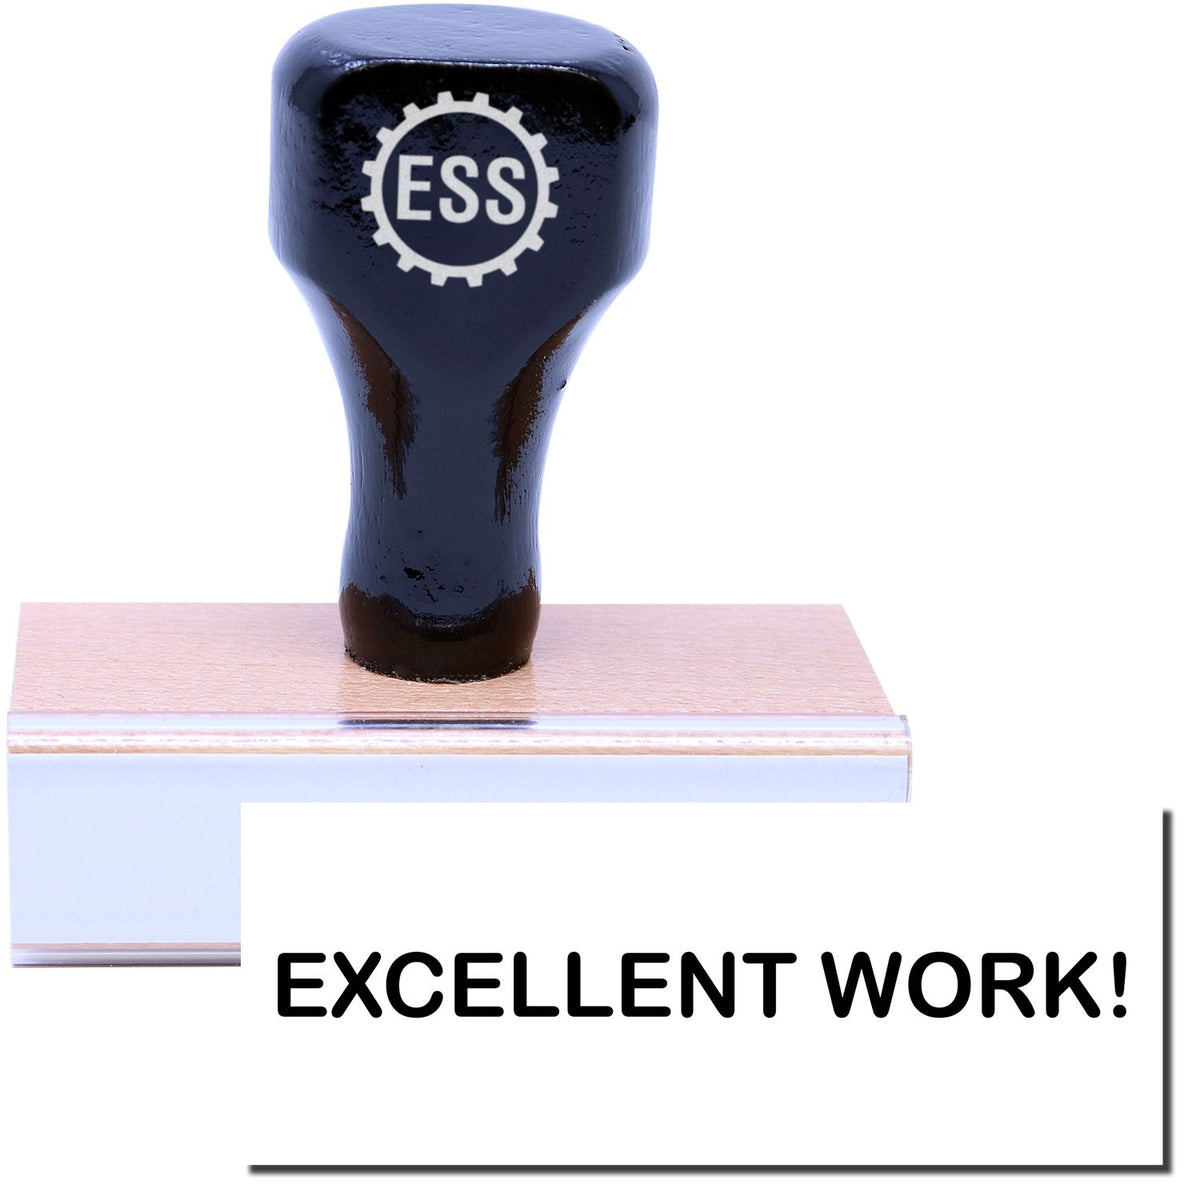 A stock office rubber stamp with a stamped image showing how the text &quot;EXCELLENT WORK!&quot; in a large font is displayed after stamping.